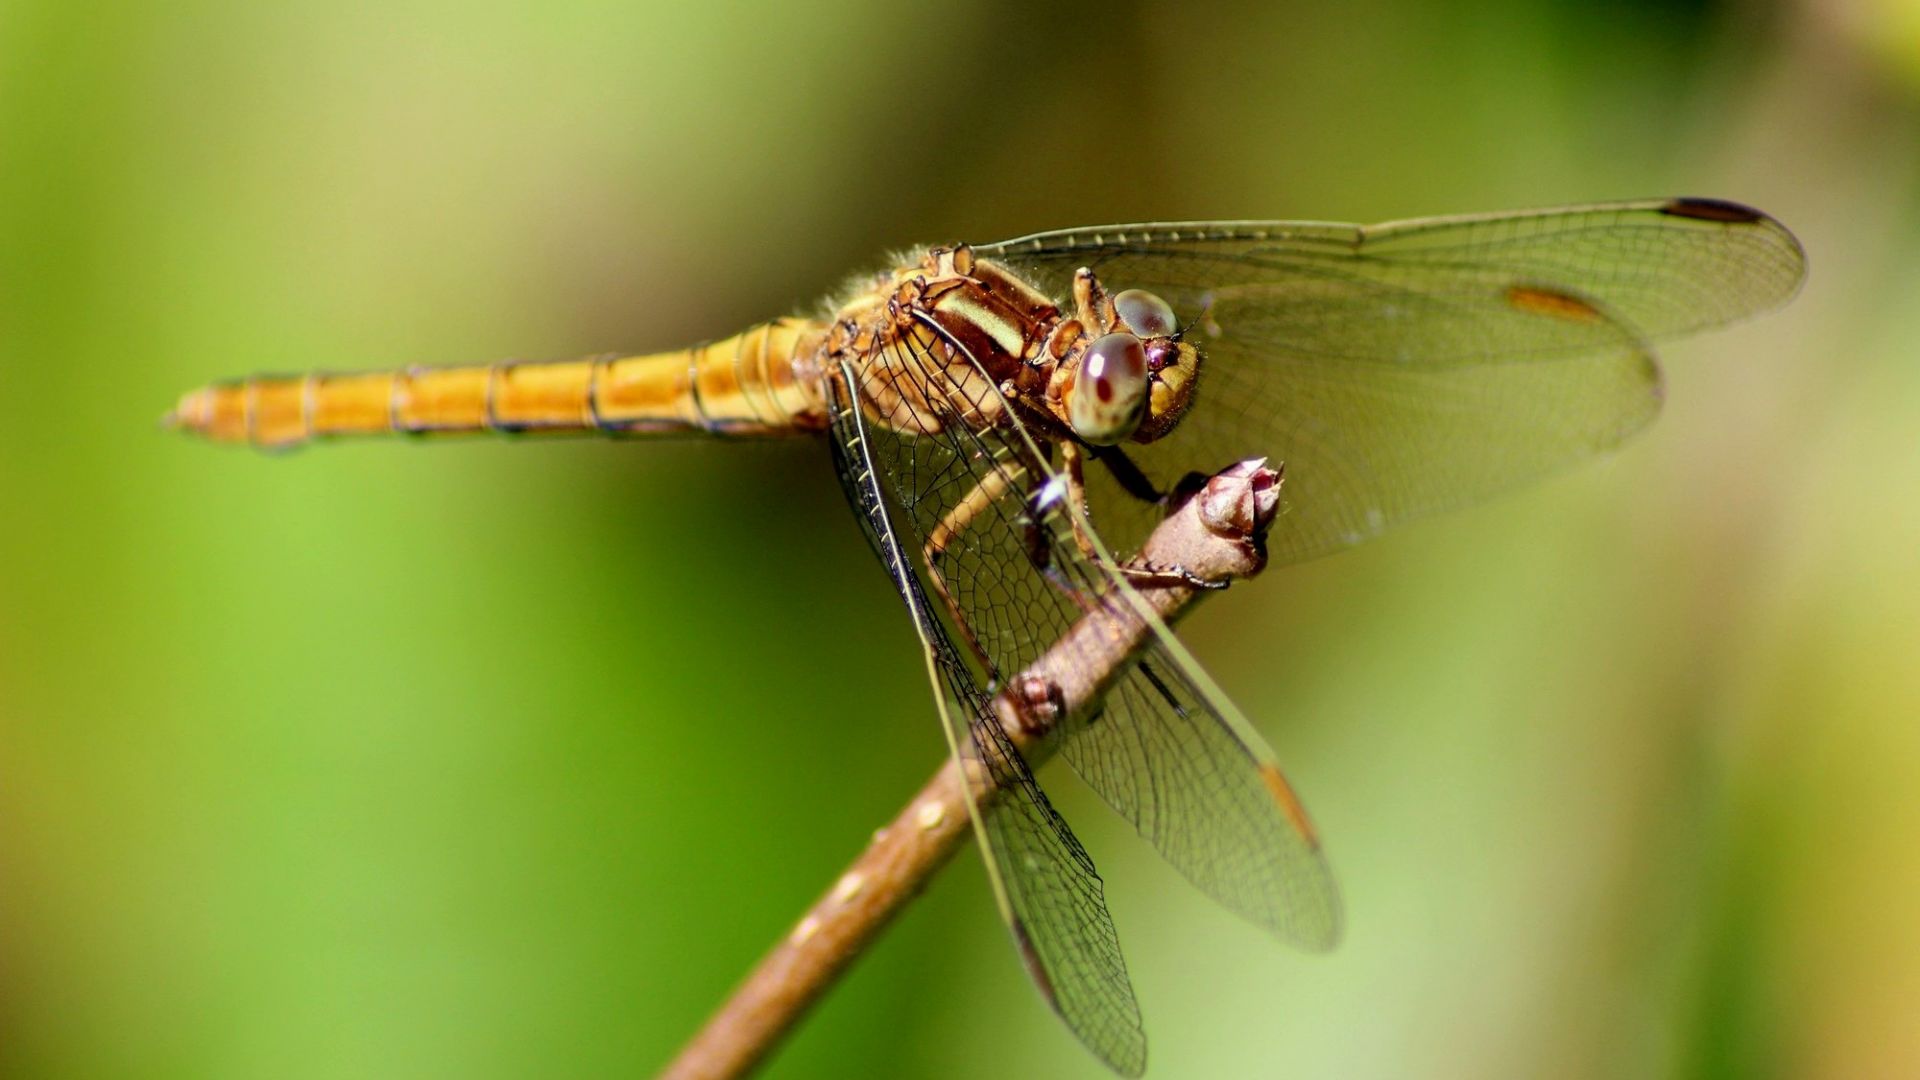 Desktop Wallpaper Dragonfly, Insect, Macro, Hd Image, Picture ...